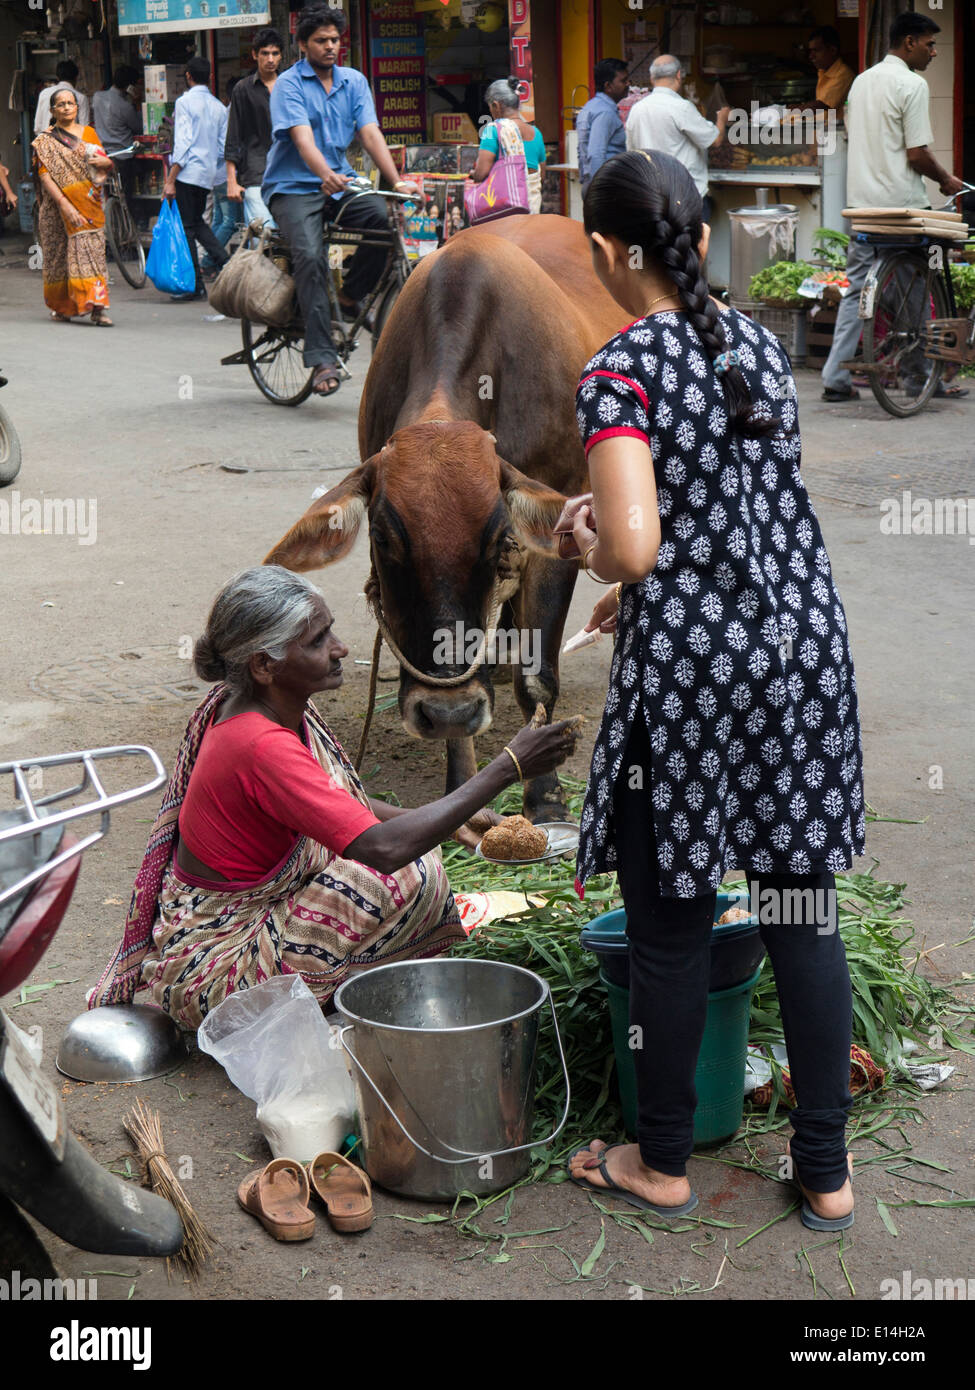 India, Mumbai, Fort District, Parsi Bazaar, old woman with cow on street selling milk Stock Photo